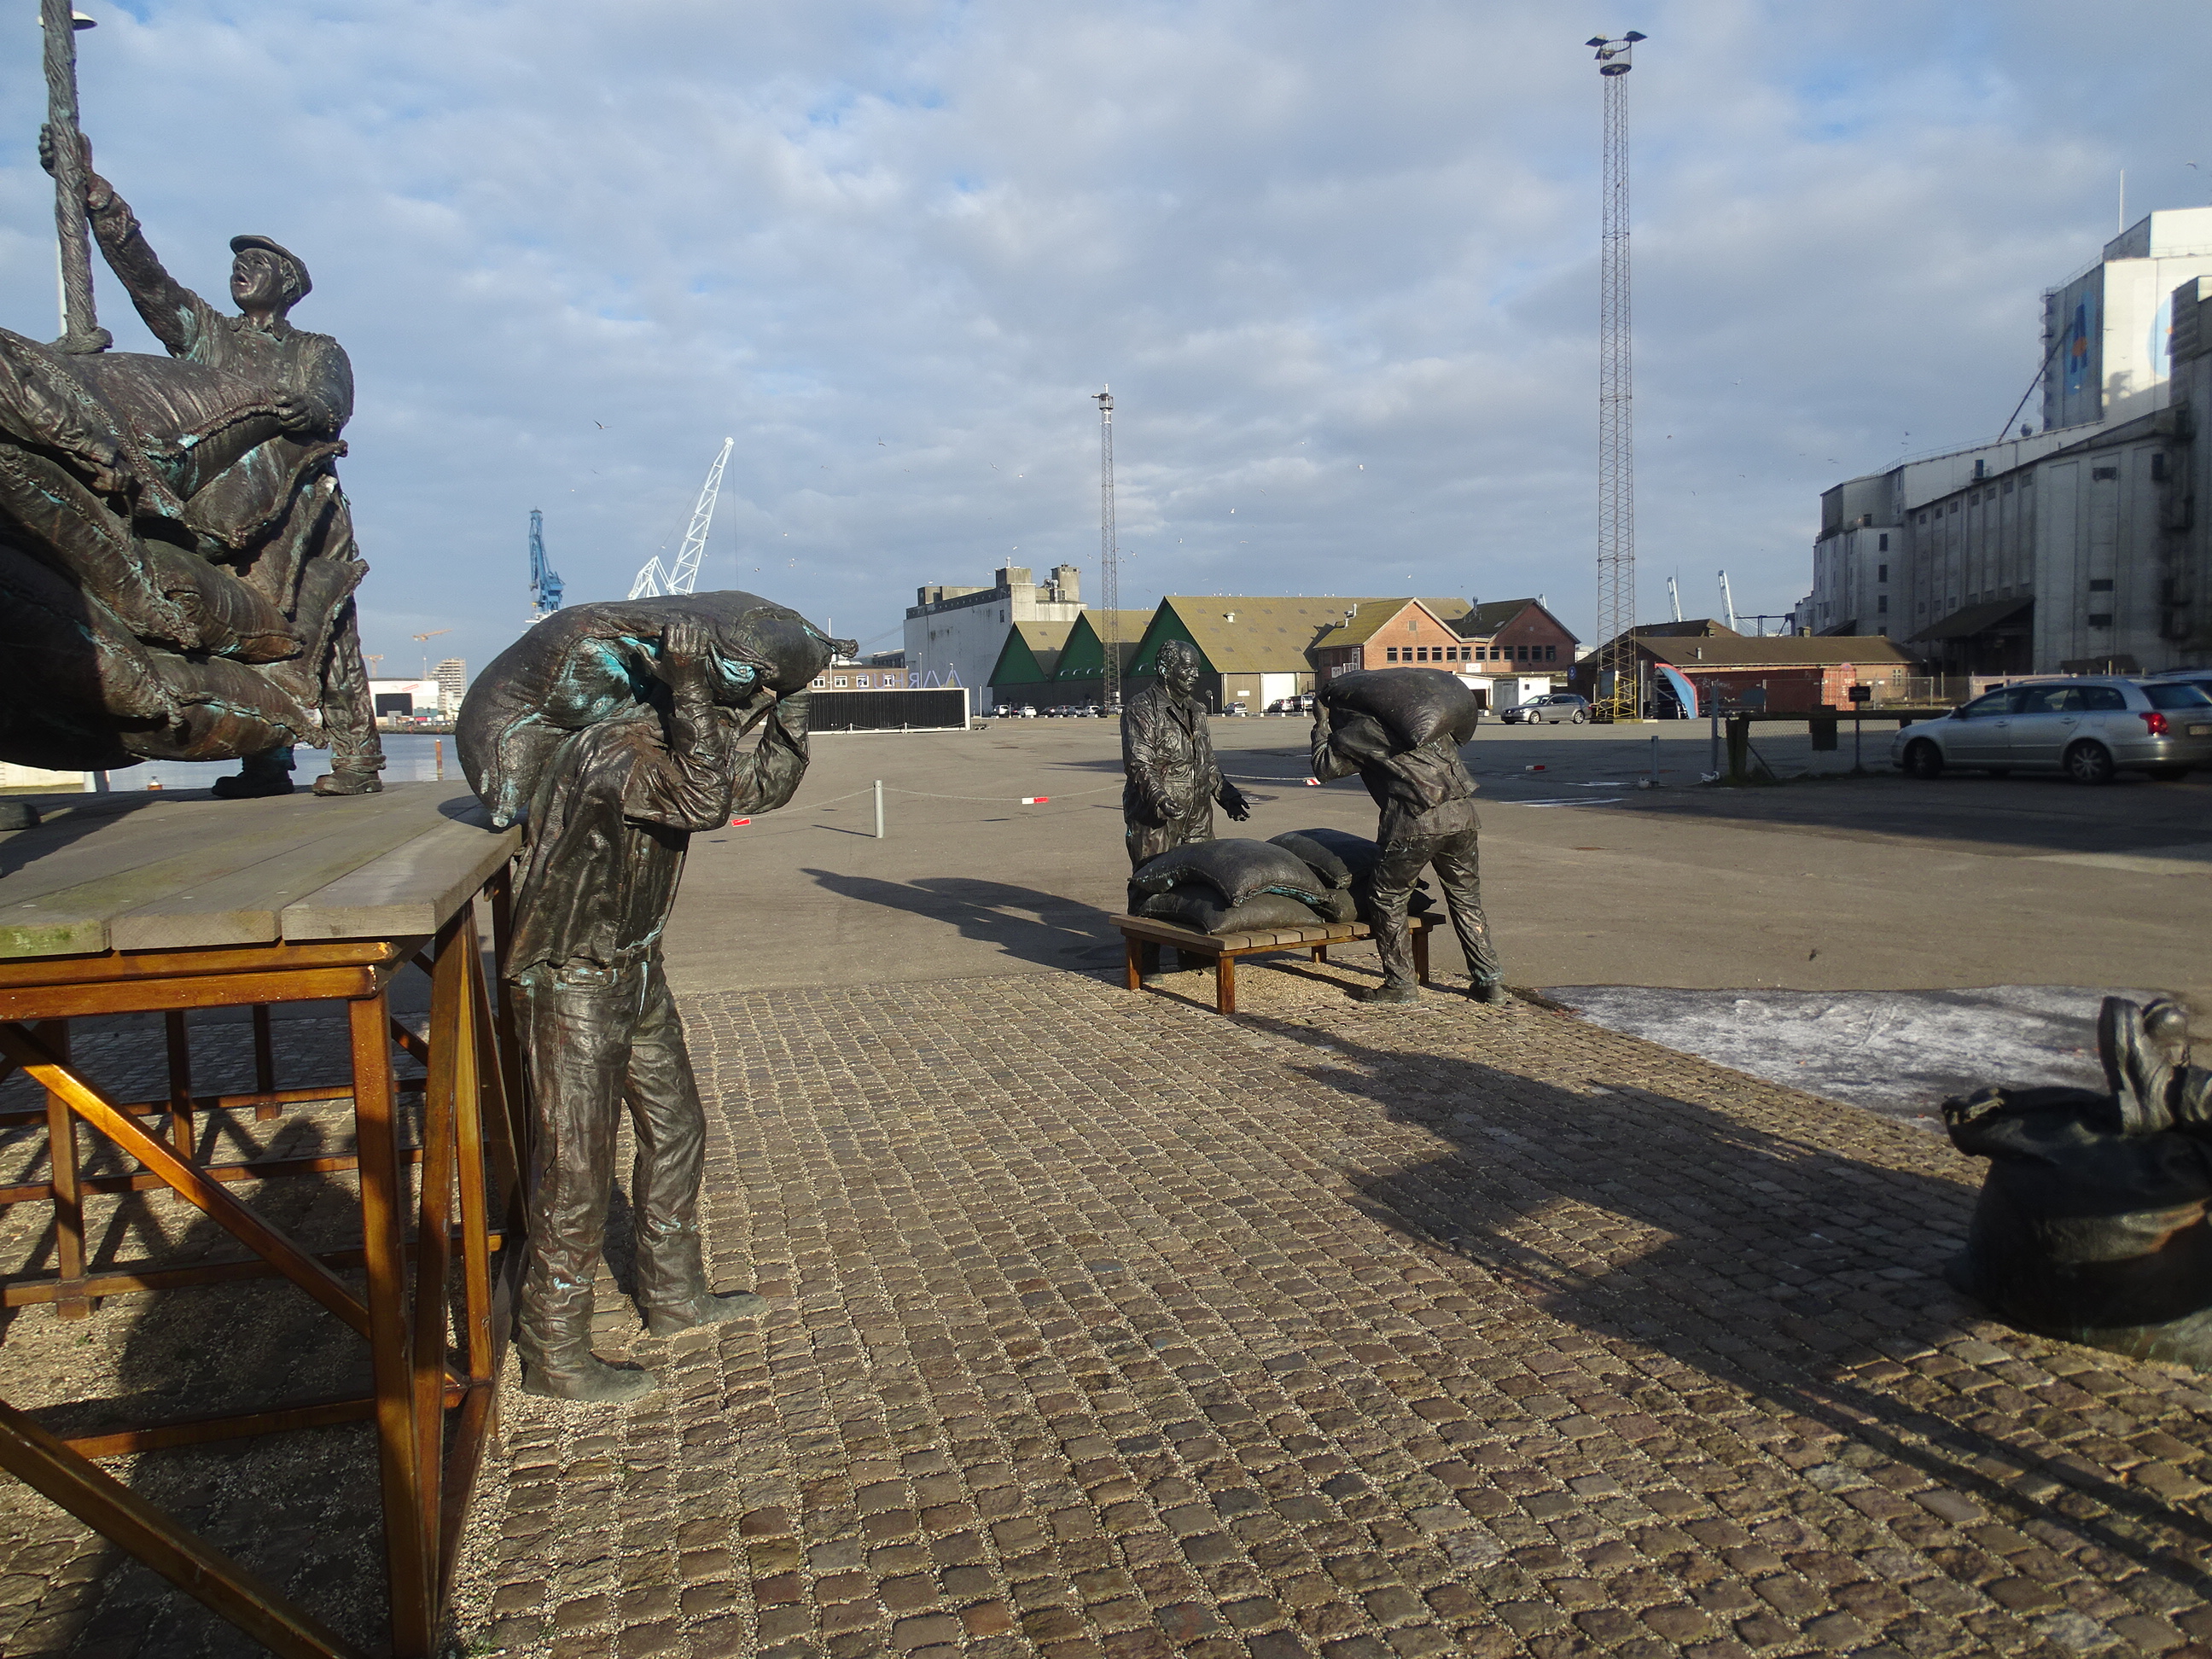 dock-worker-monument-by-jens-galschiot